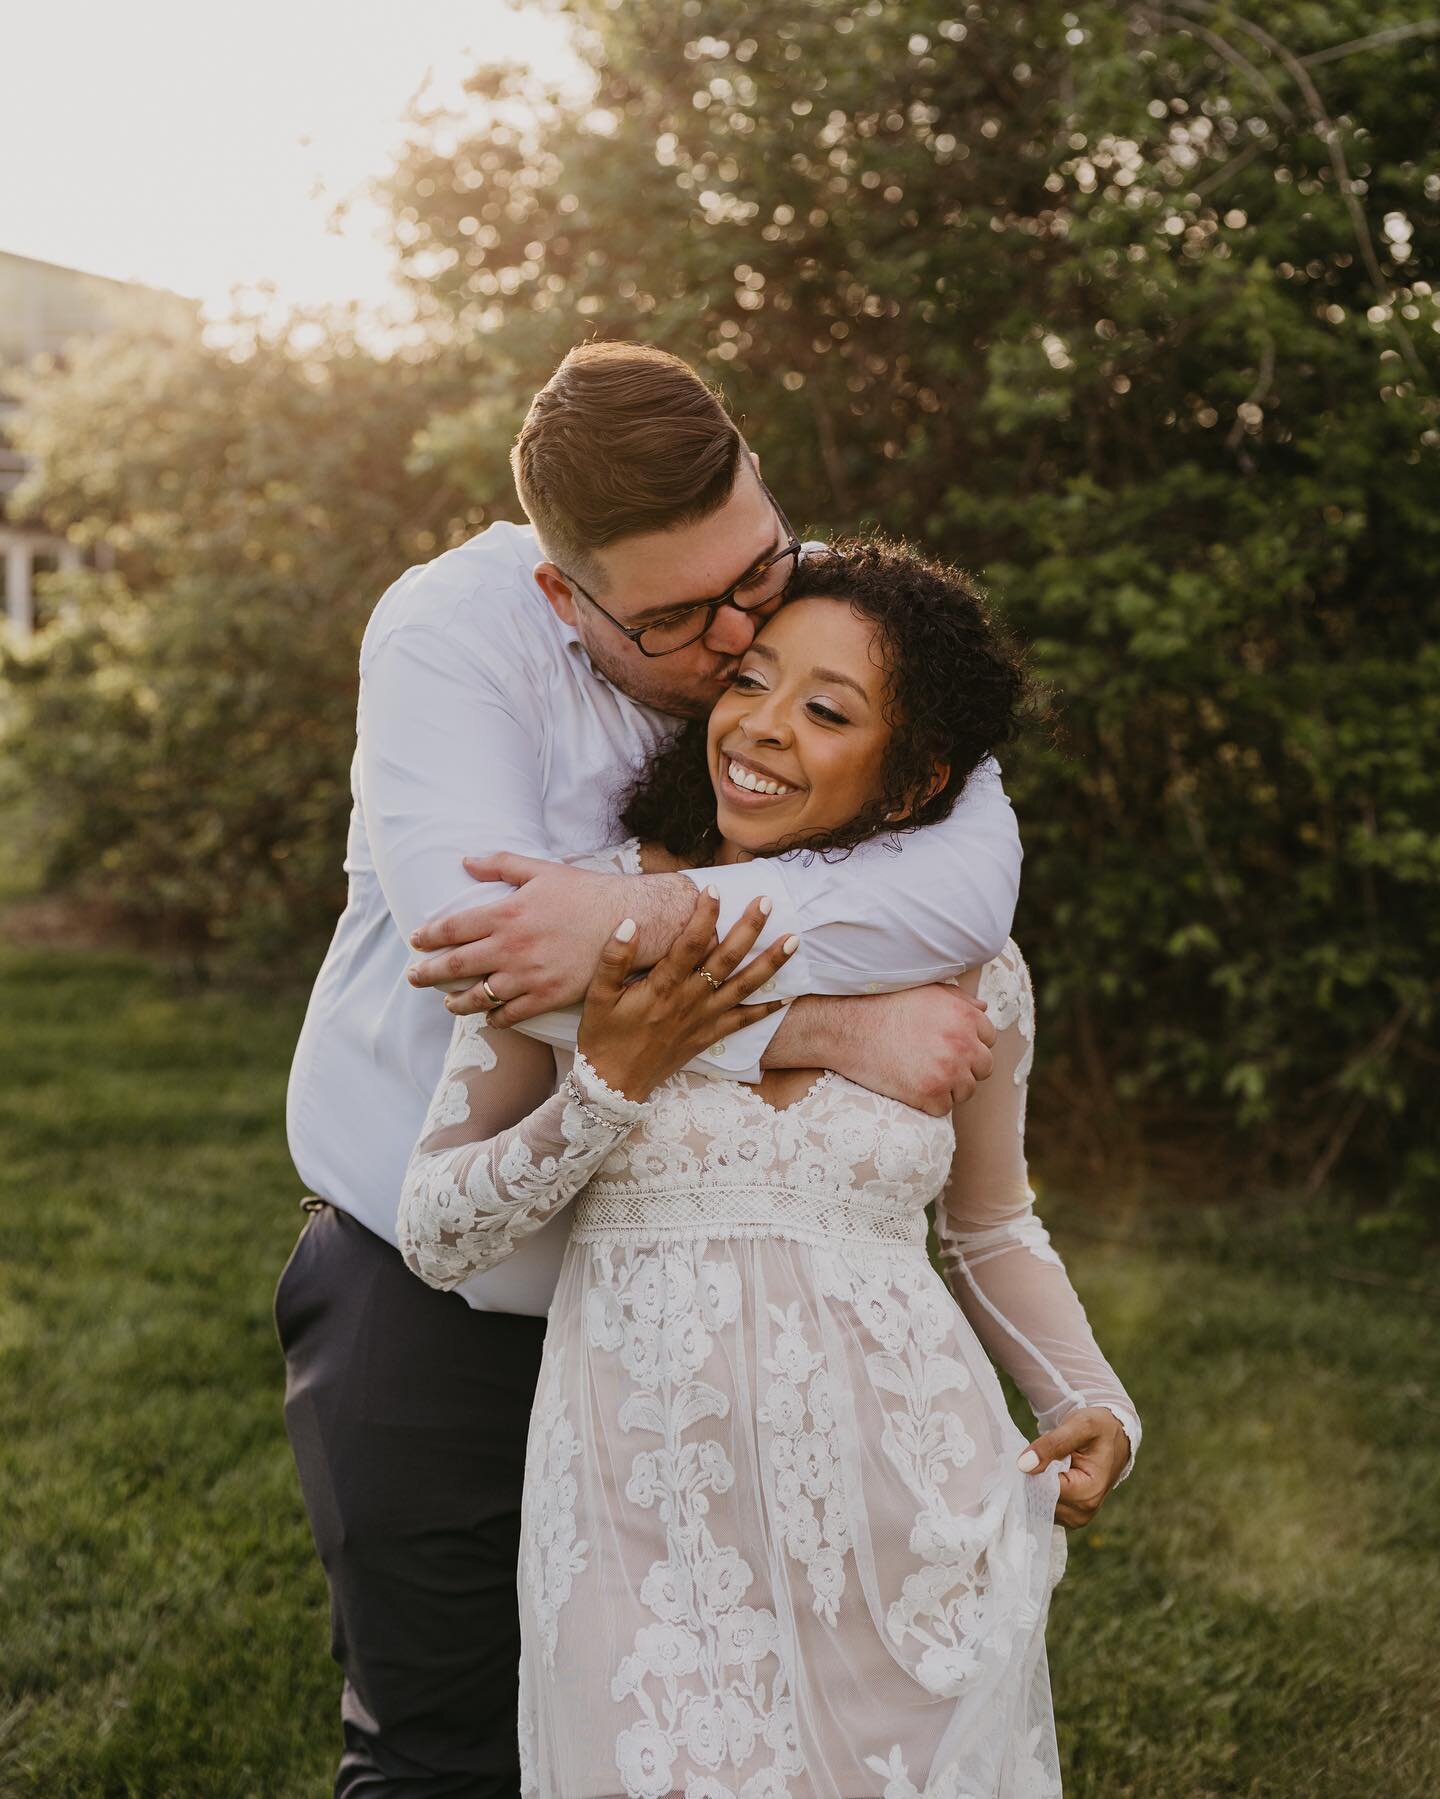 I live for golden hour ☀️ Sarah and Grayson were such a fun couple to work with and I&rsquo;m so glad we got to meet. They&rsquo;re sweet, kind, fun, and so in love! Happy gallery delivery day to these two!

#weddingphotography #weddingphotographer #